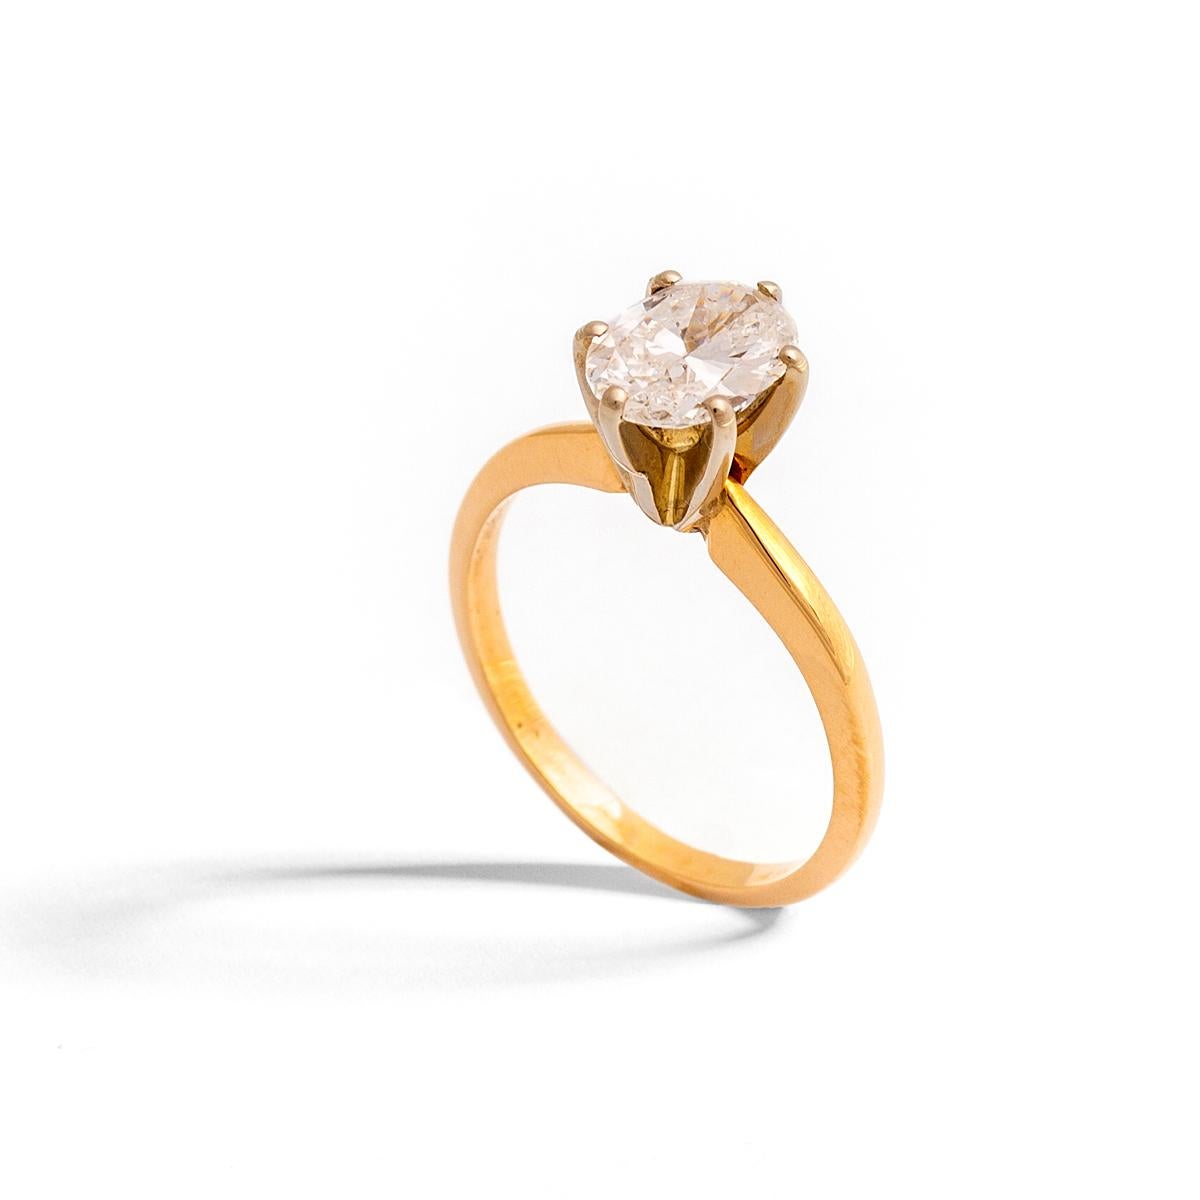 Solitaire Oval Shape Diamond on yellow gold Ring.
Diamond oval shape: 9.02 x 5.77 millimeters.
Modern cut. Estimated to be H-I color and Si clarity.
Ring Size: 4 3/4.
Gross weight: 2.44 grams.